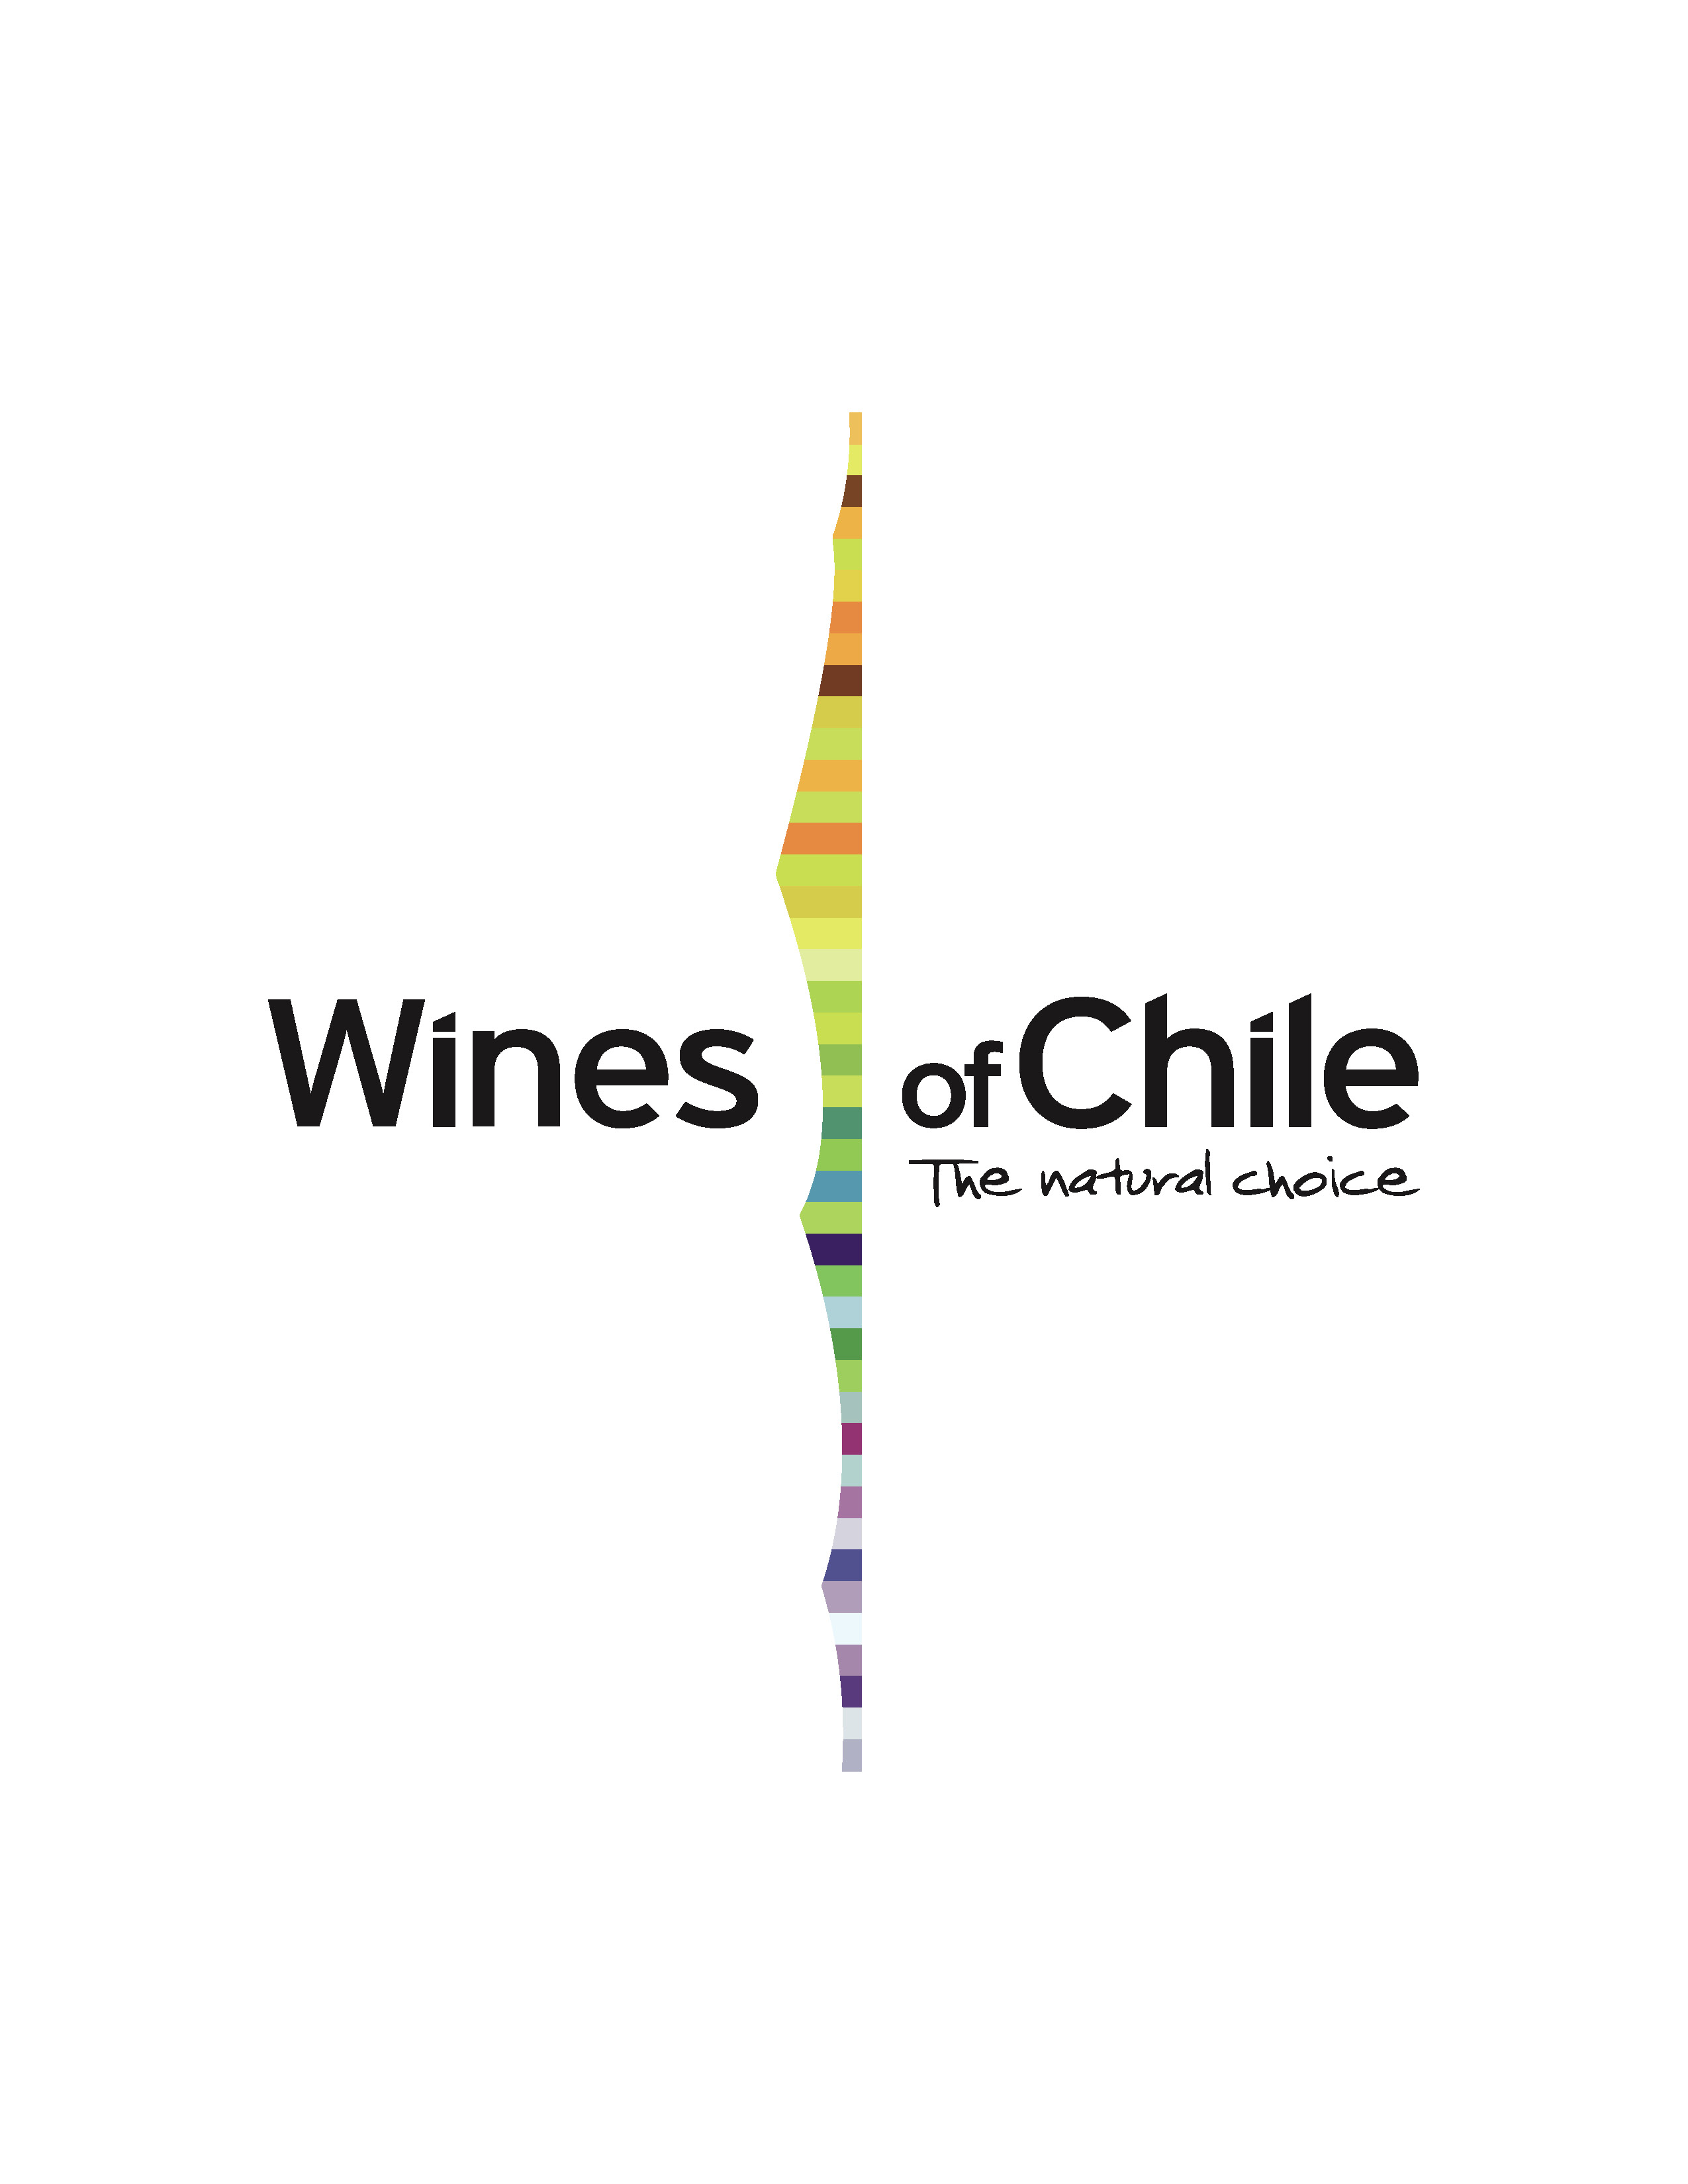 Wines of Chile USA